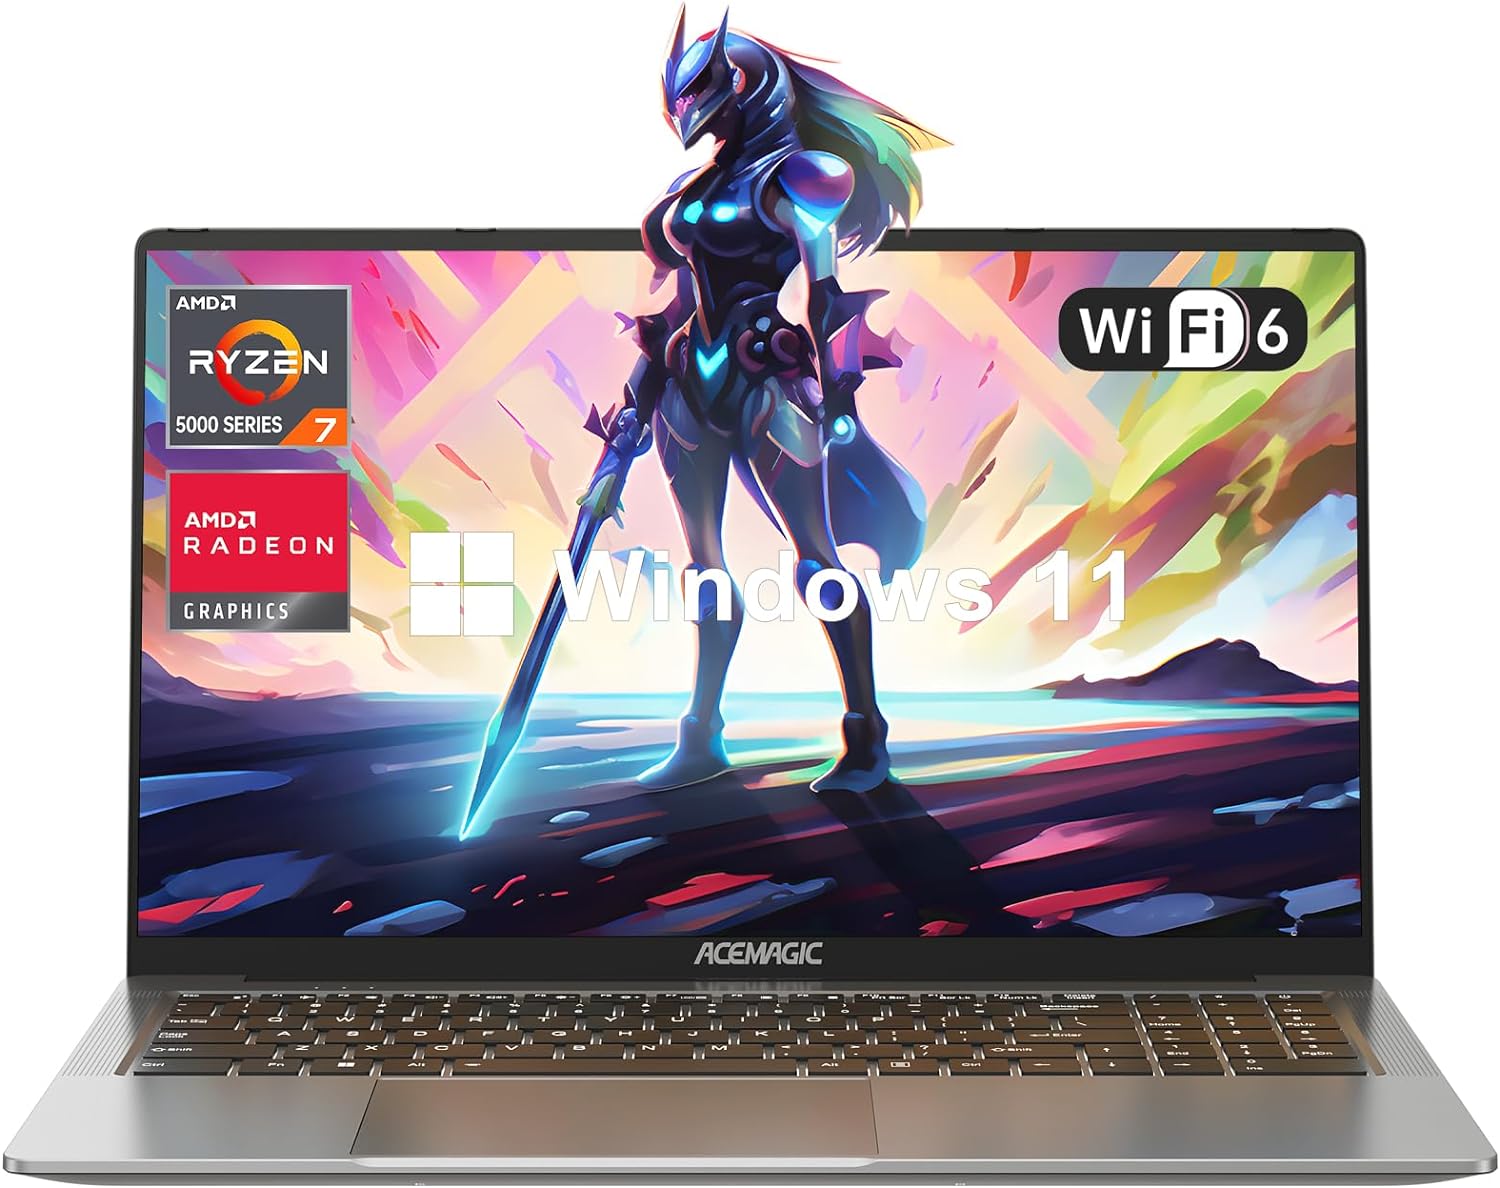 Laptop with Backlit Keyboard Gaming Laptop with AMD Ryzen 7 - New York - Albany ID1549602 2